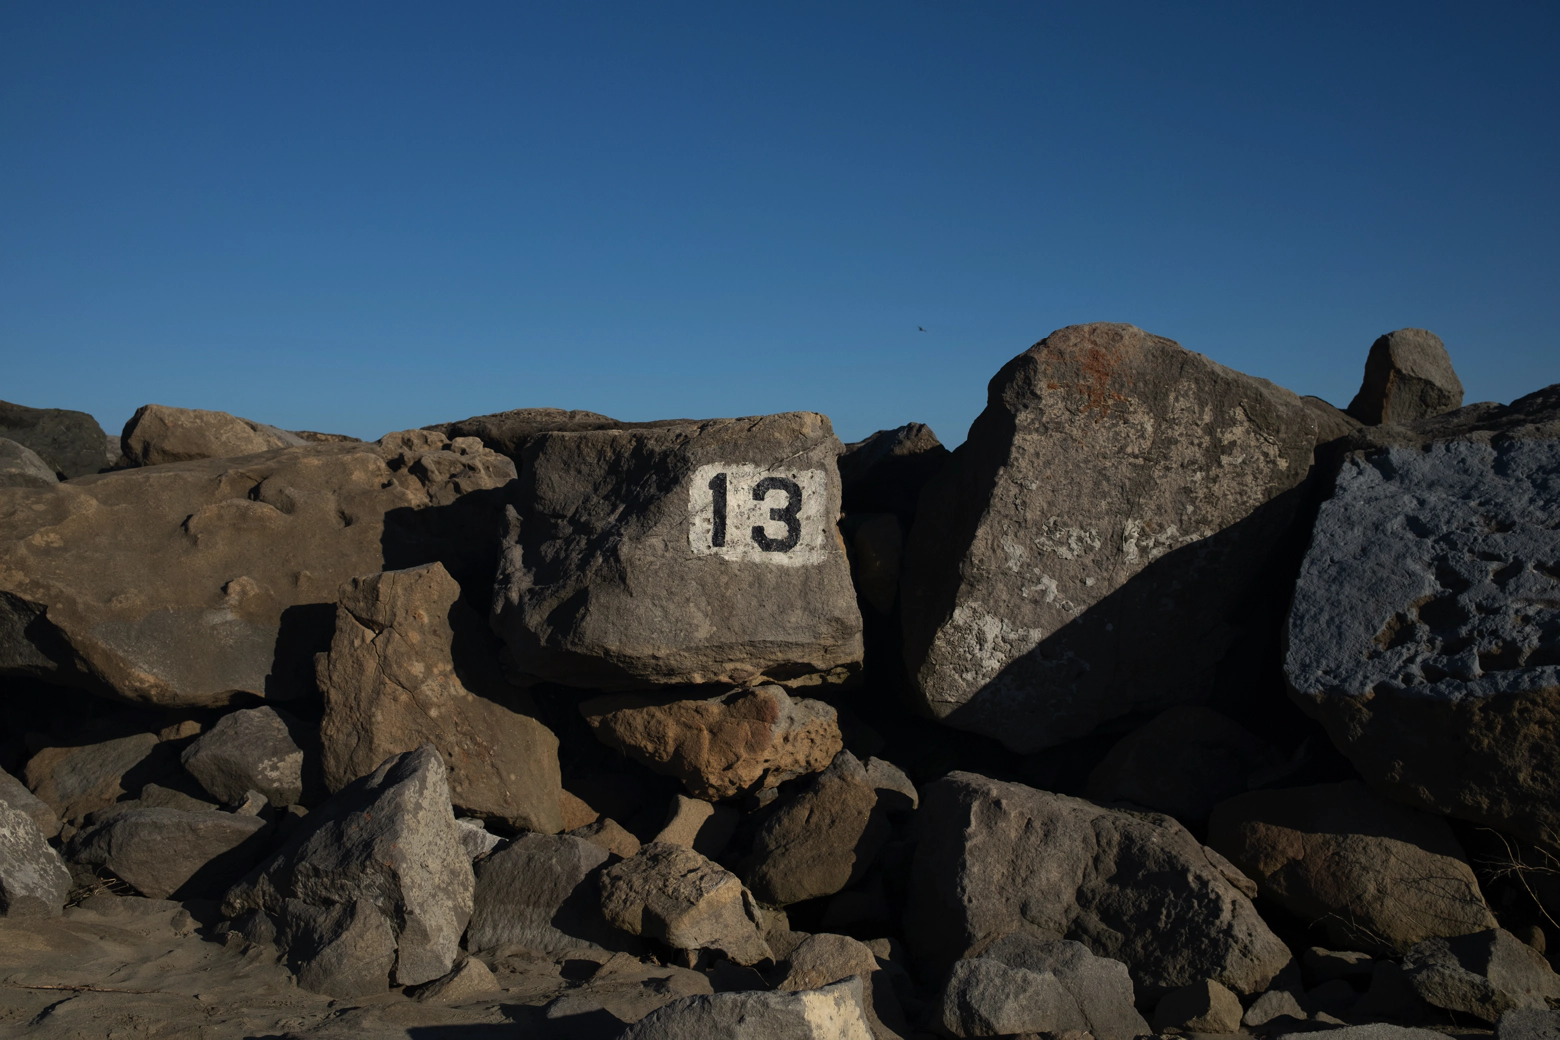 Large rocks along a shoreline with the number 13 painted on the center most rock